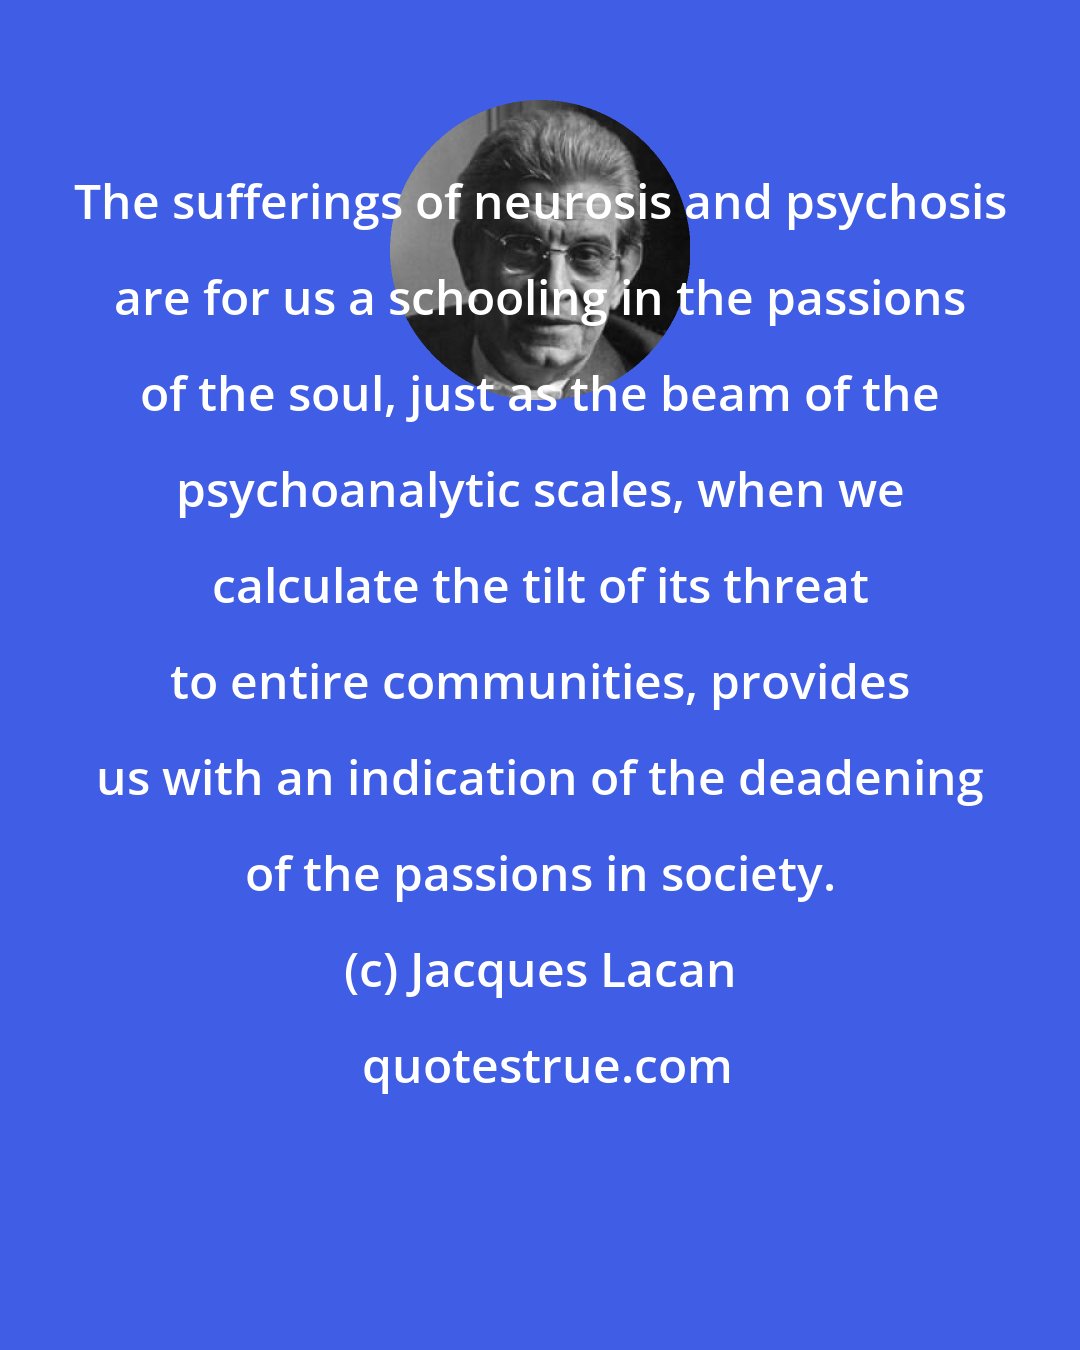 Jacques Lacan: The sufferings of neurosis and psychosis are for us a schooling in the passions of the soul, just as the beam of the psychoanalytic scales, when we calculate the tilt of its threat to entire communities, provides us with an indication of the deadening of the passions in society.